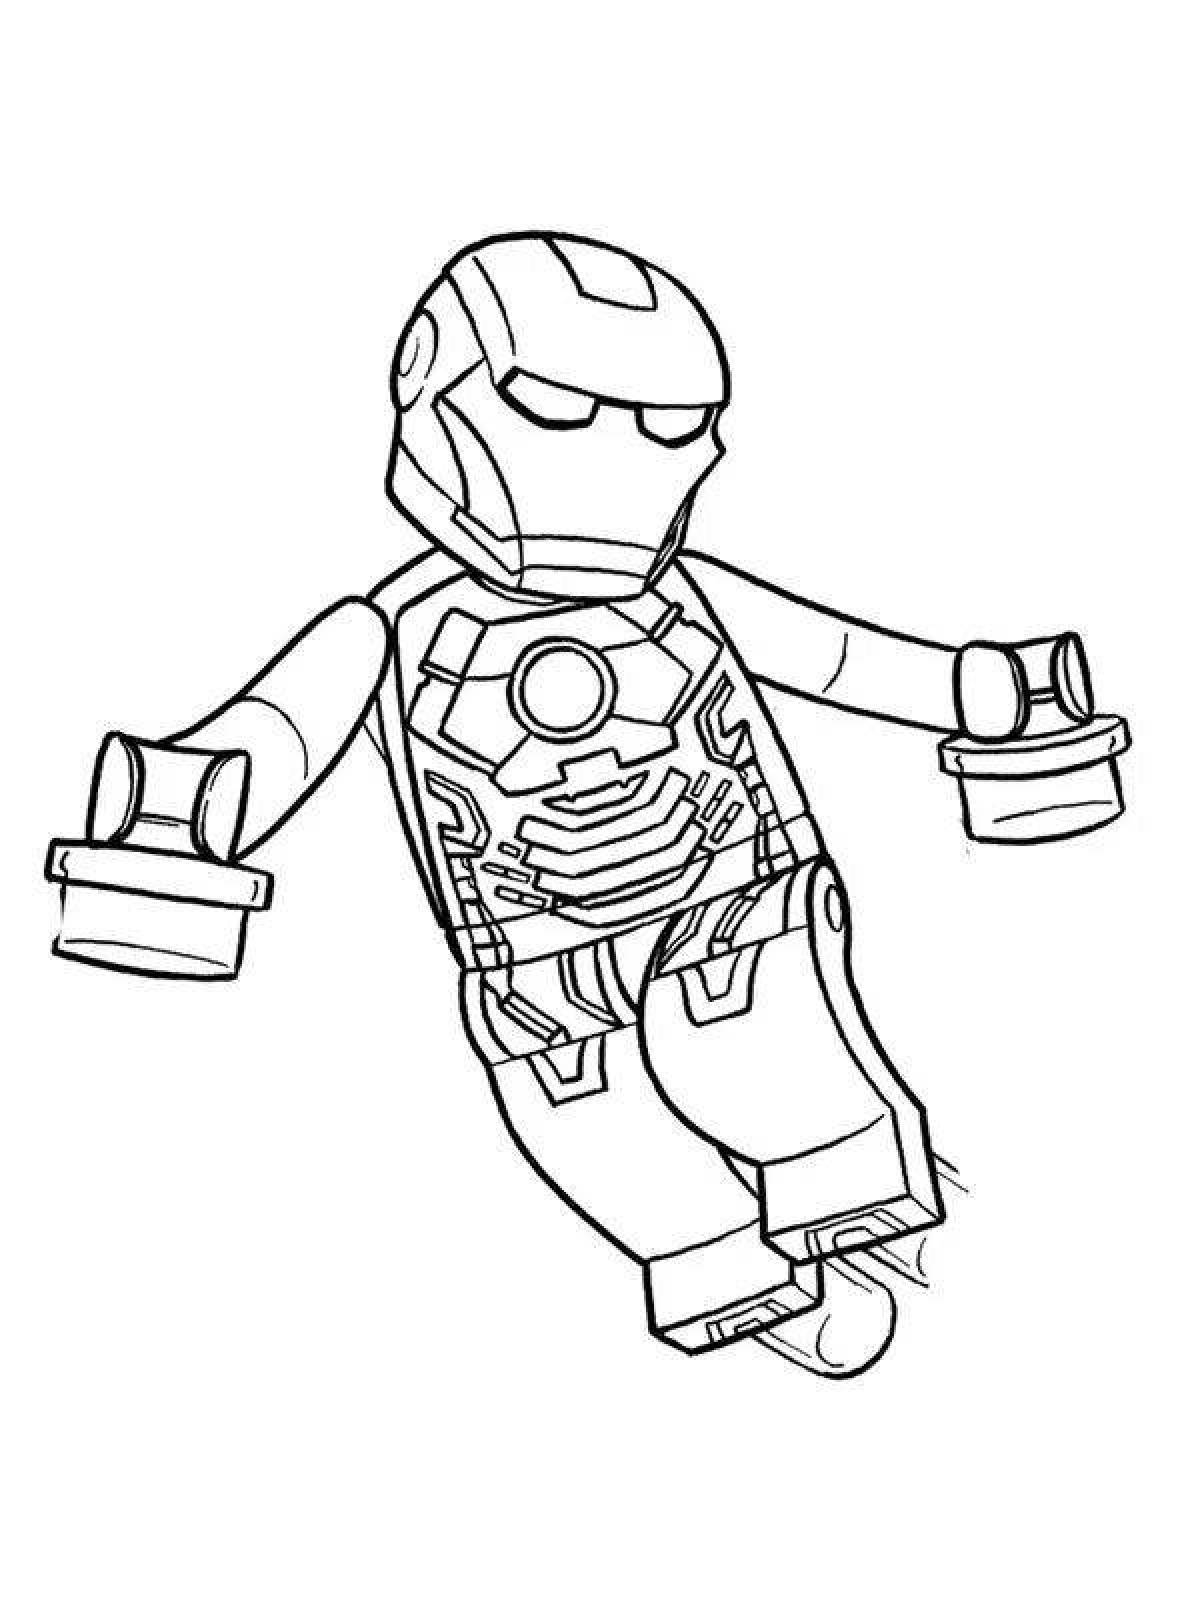 Outstanding lego captain america coloring page